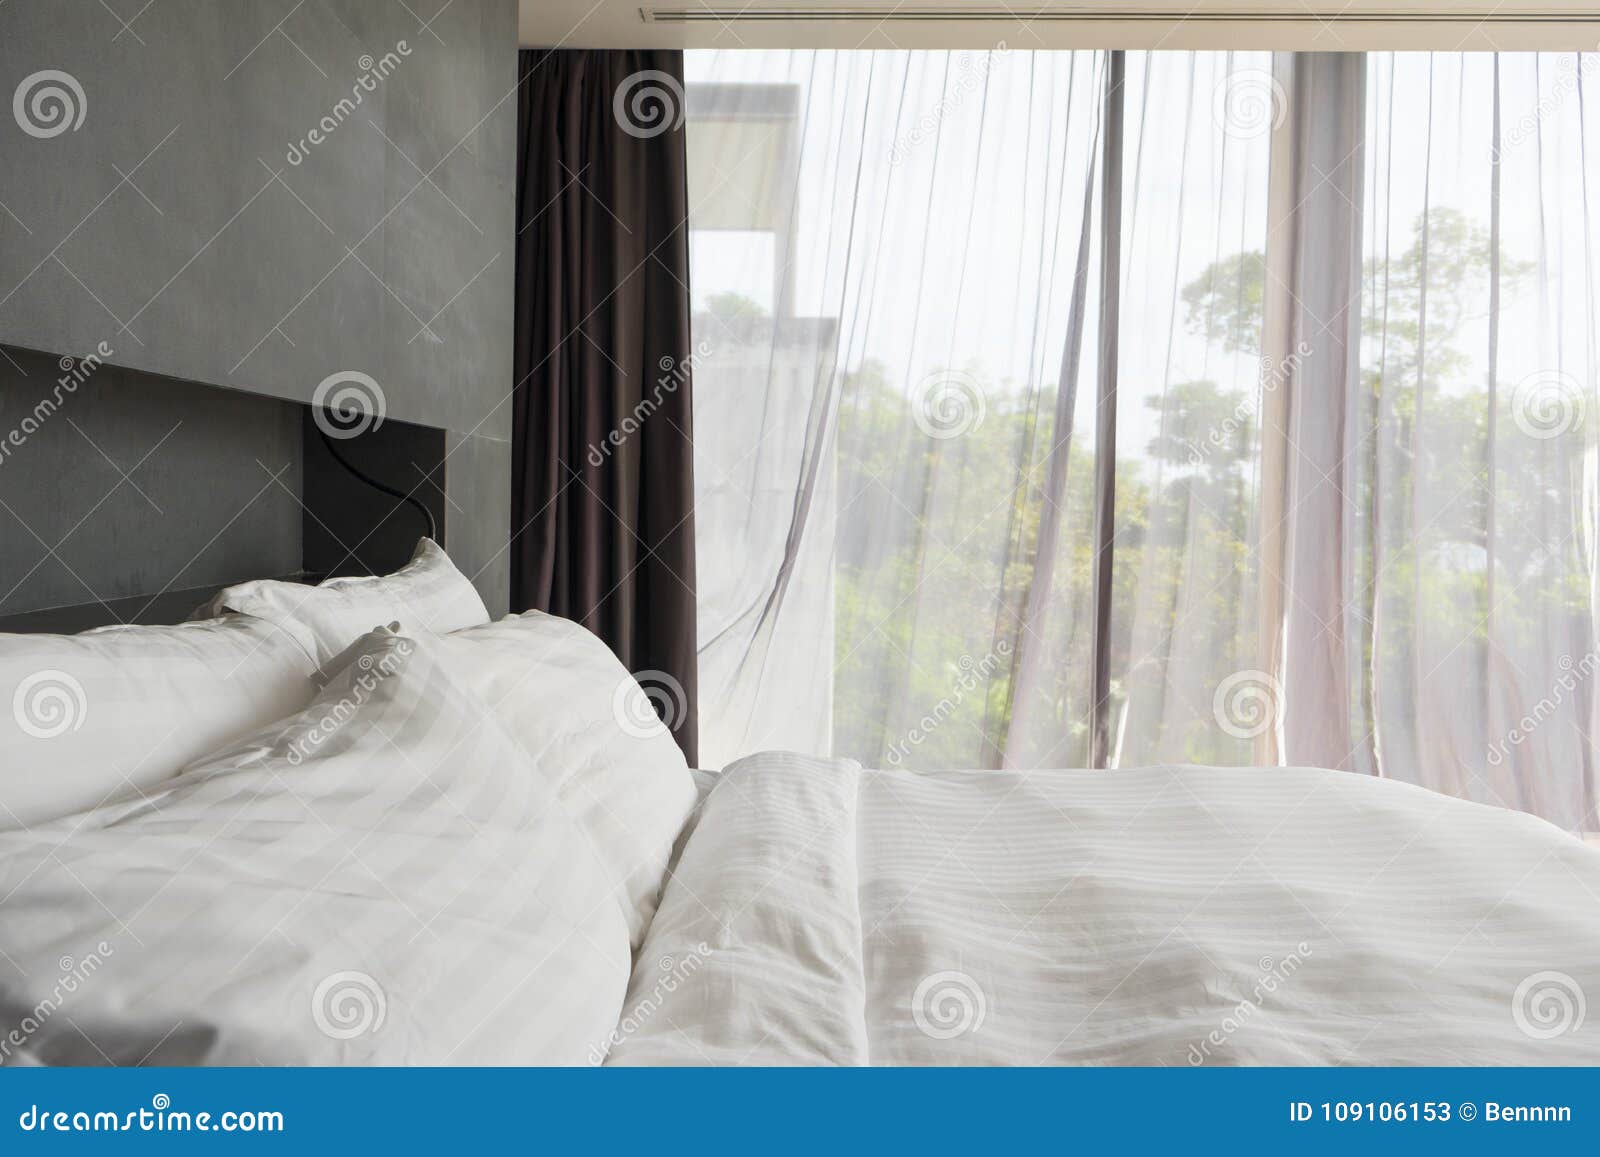 White Pillows On White Bed In Bedroom Stock Image Image Of